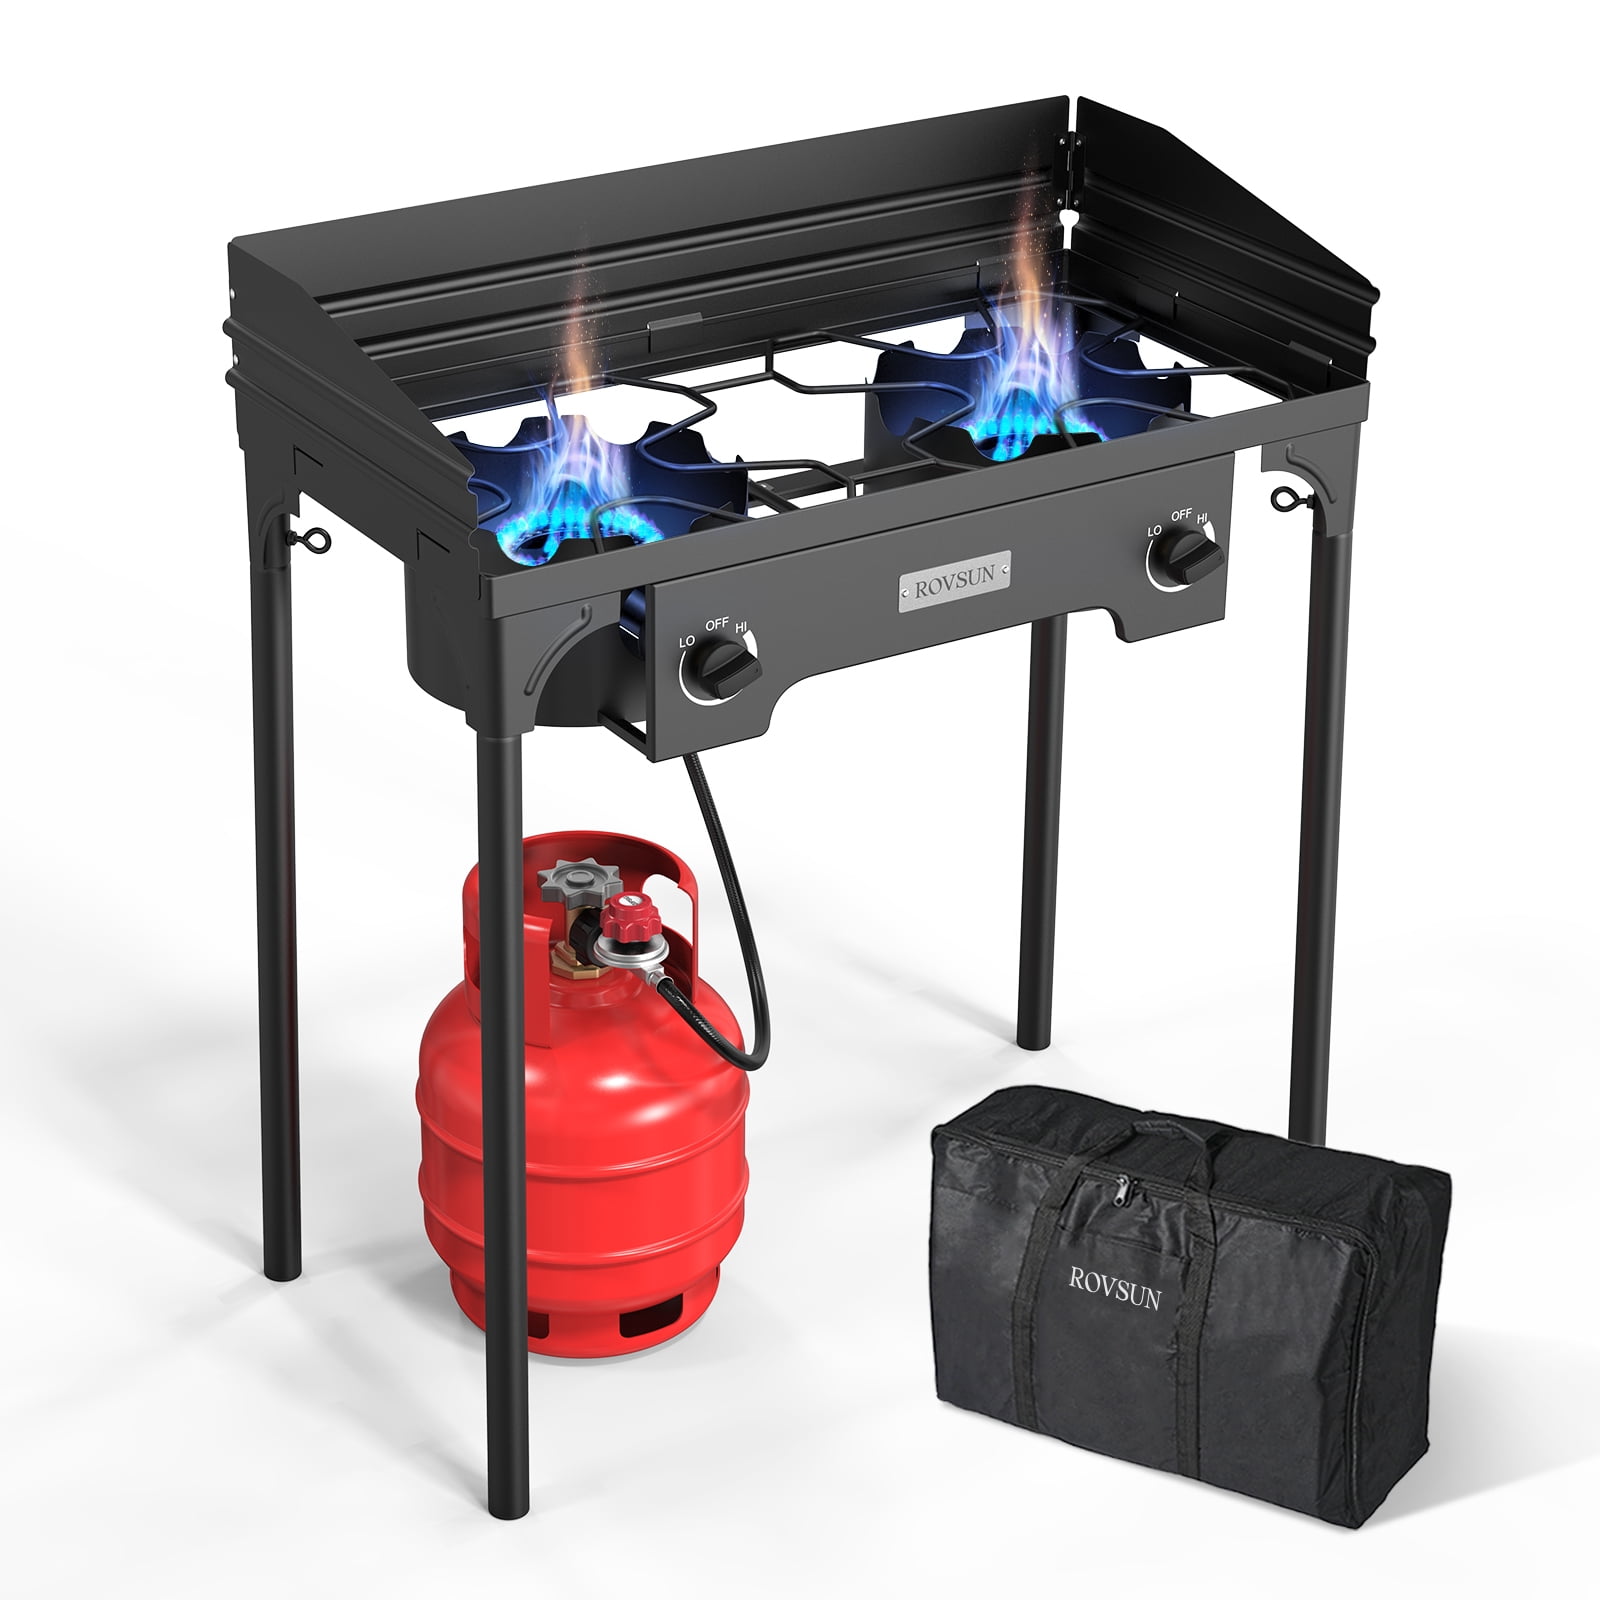 Outdoor Stove Propane Burners for Outdoor Cooking - 3 Burner Gas Burners  for Cooking Outdoor Propane Stove, High Pressure Burner Camp Stove, Patio